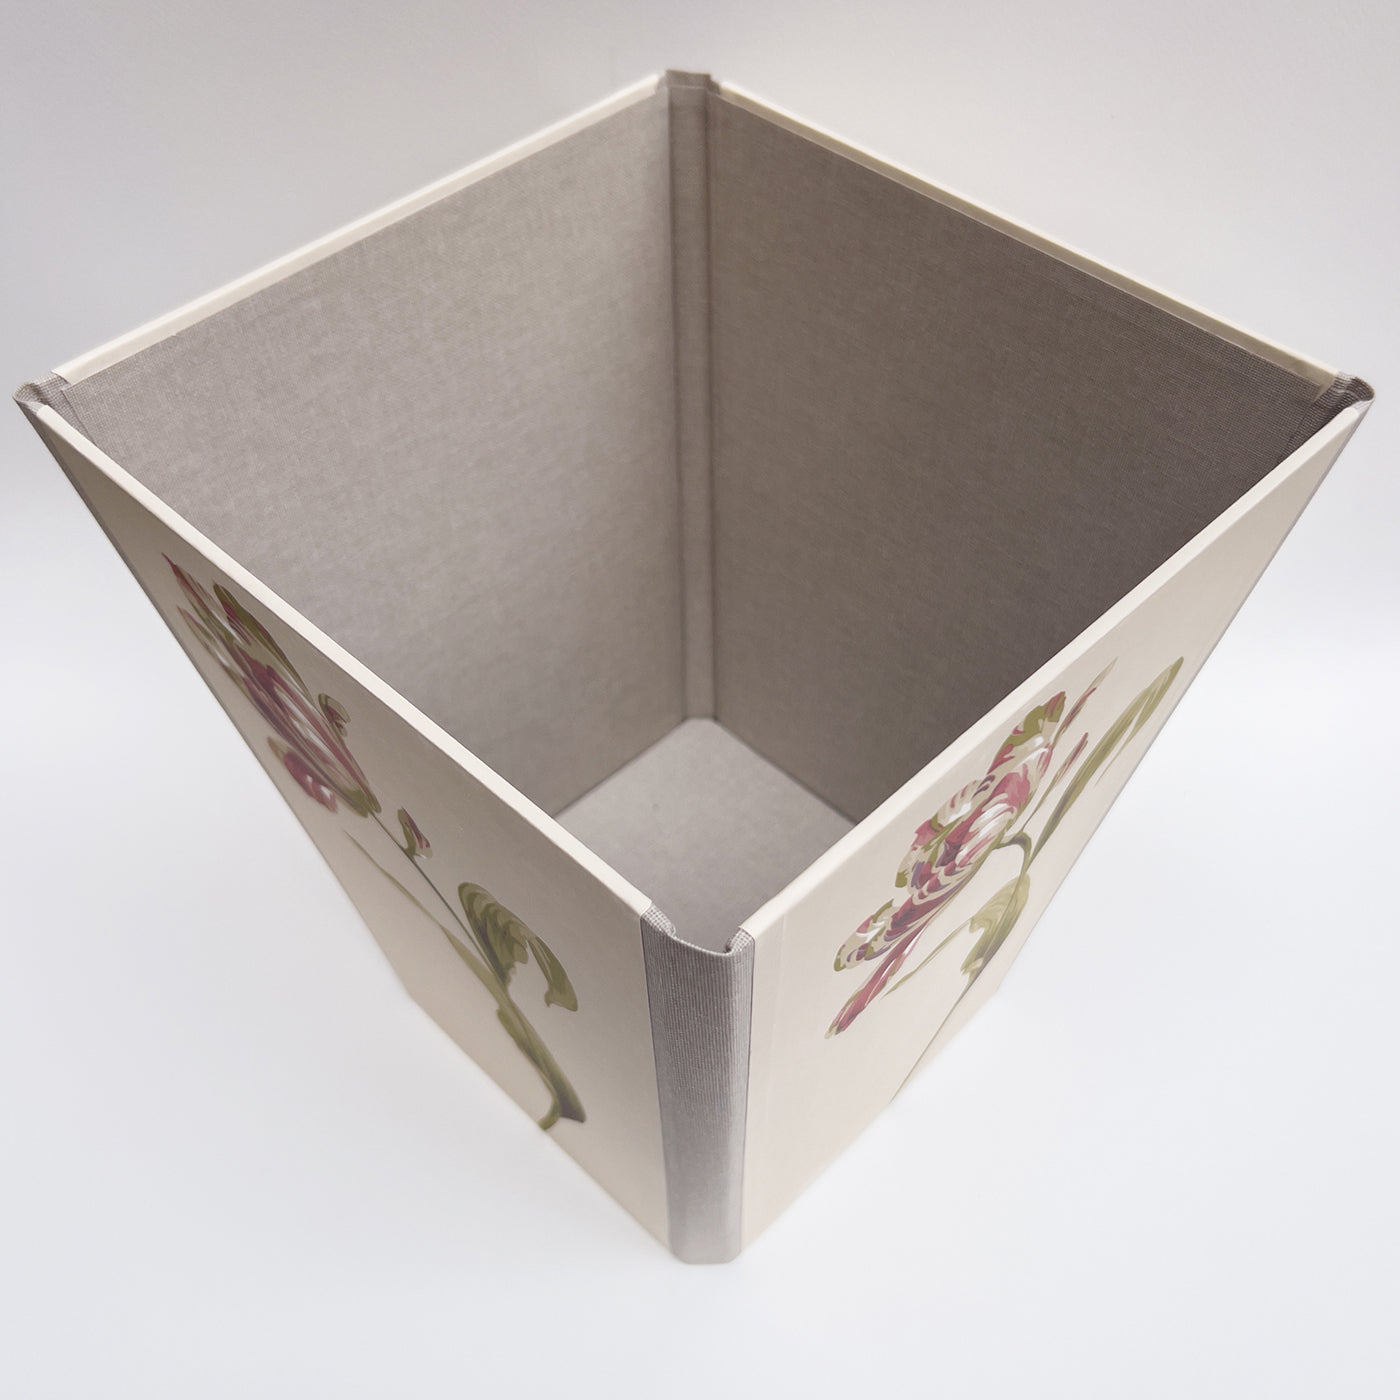 Floral Beige & Taupe Foldable Paper Bin - Alternative view 3